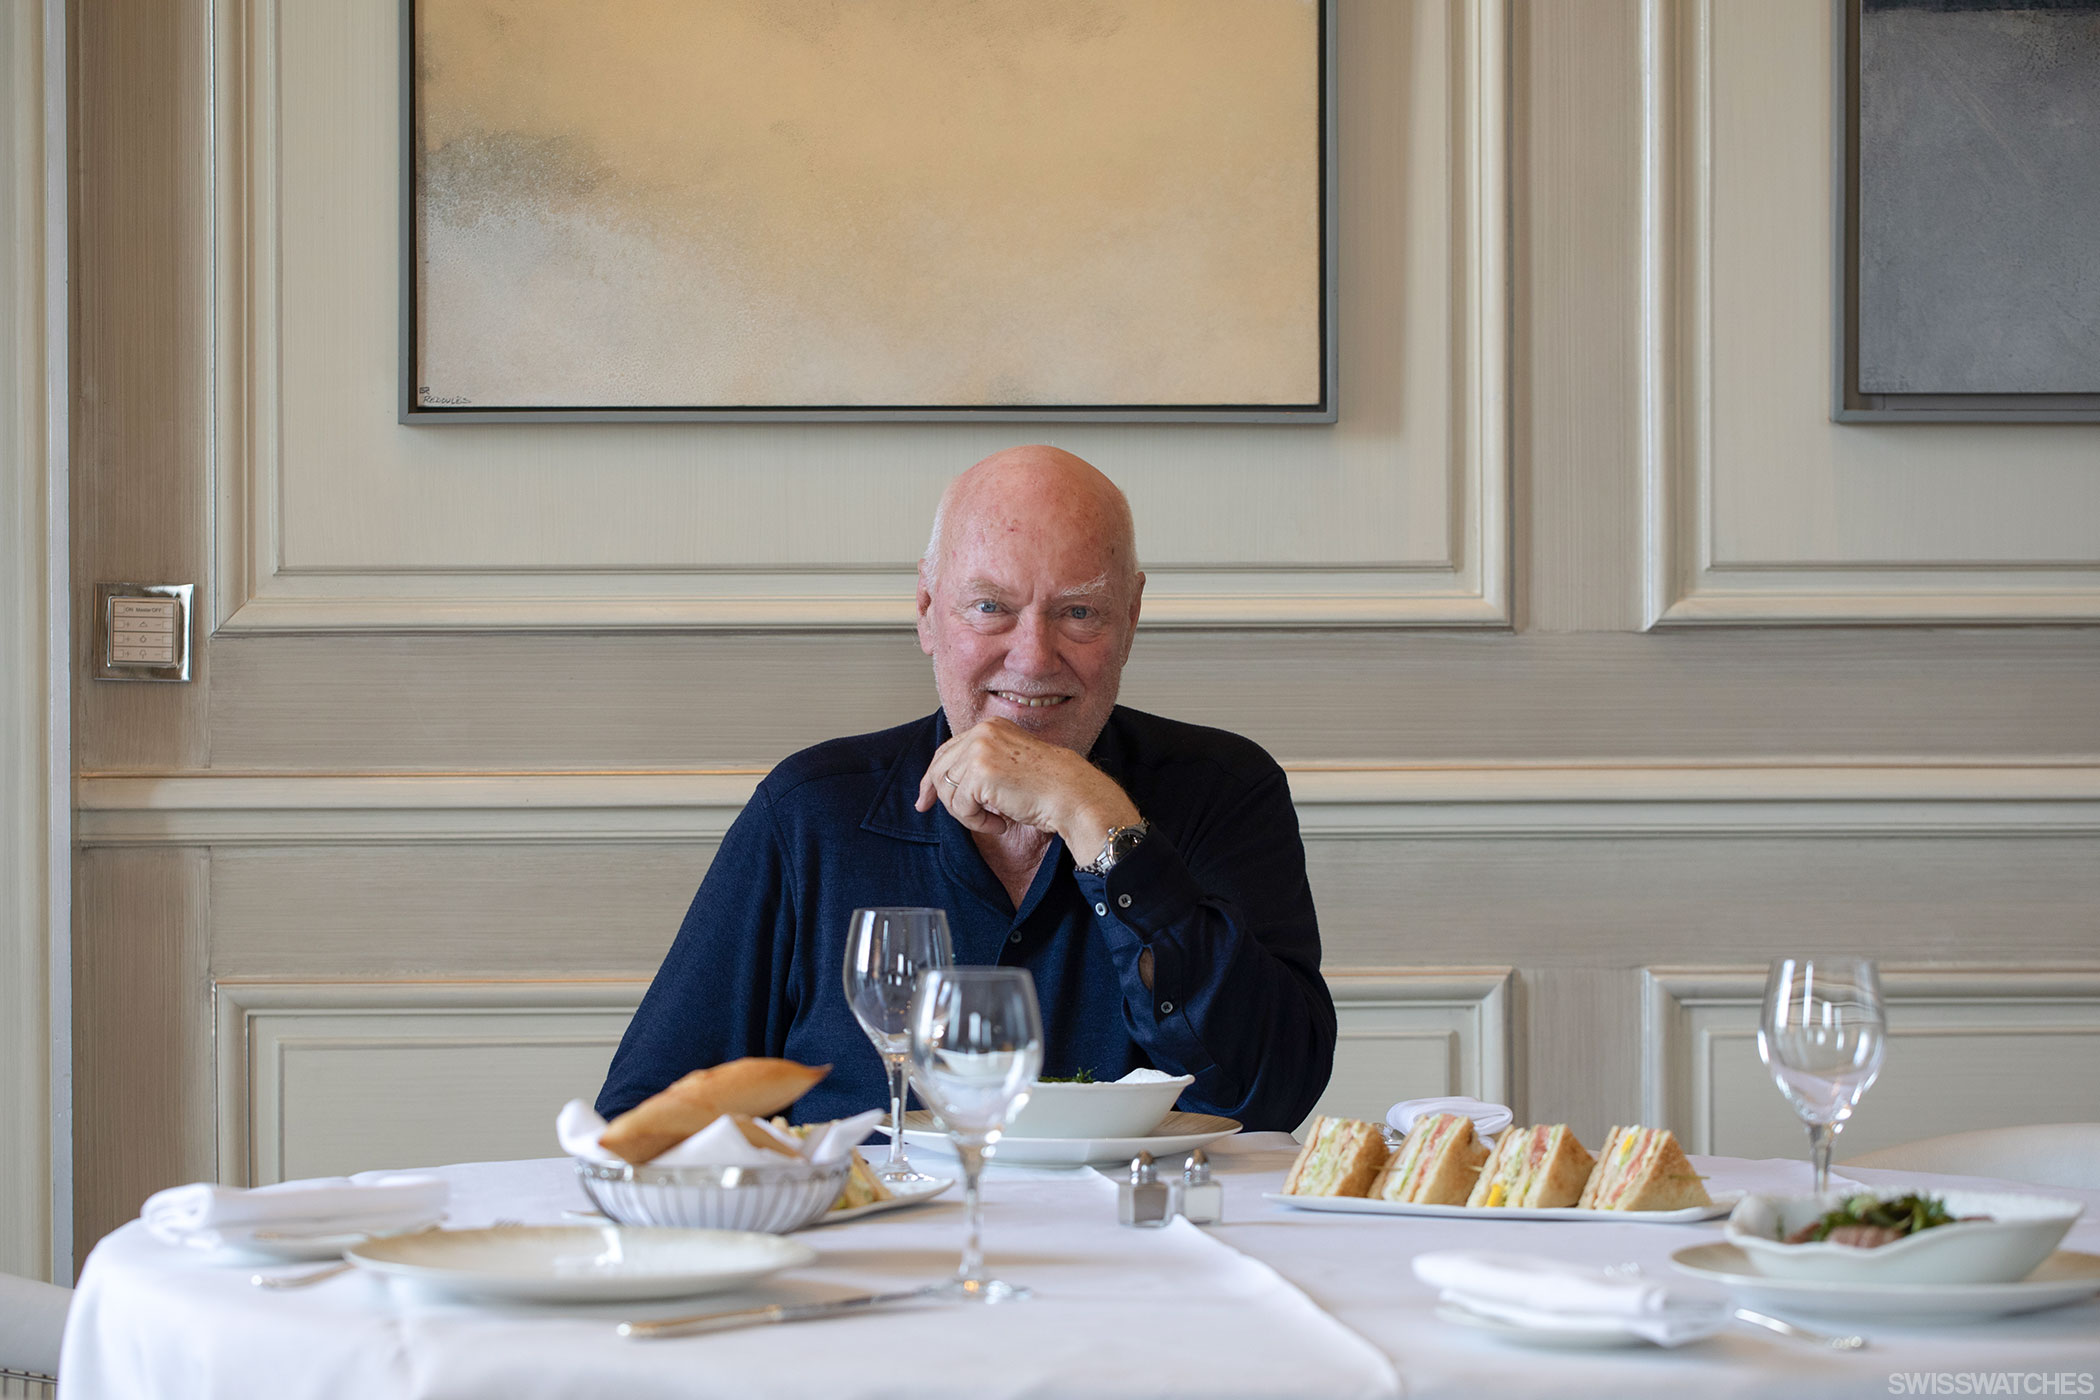 Jean-Claude Biver Presents His Personal Watch Collection At Phillips'  London Auction House